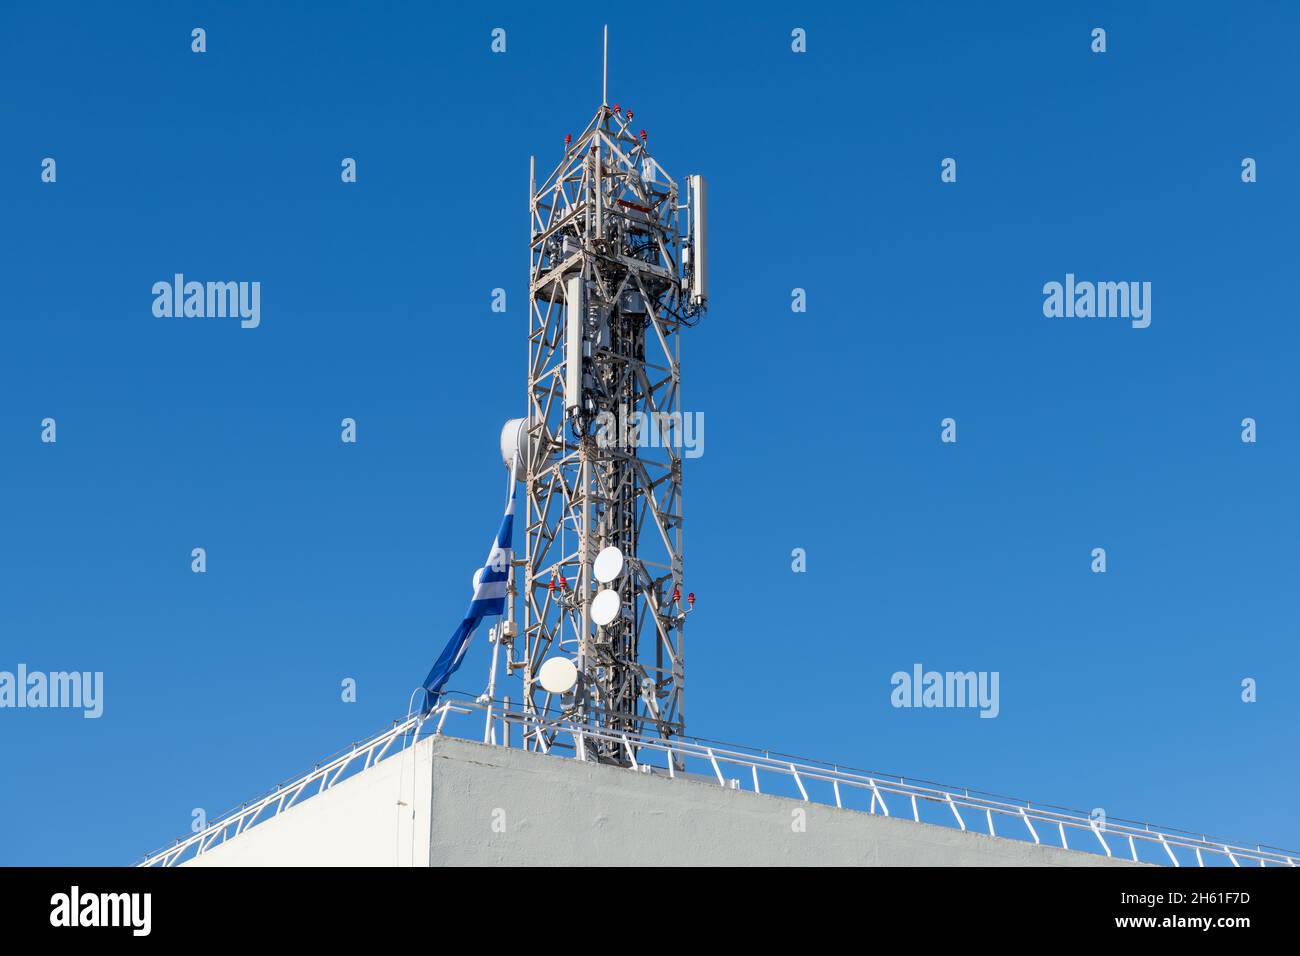 A wifi transmission mast on the rooftop of a building. Stock Photo